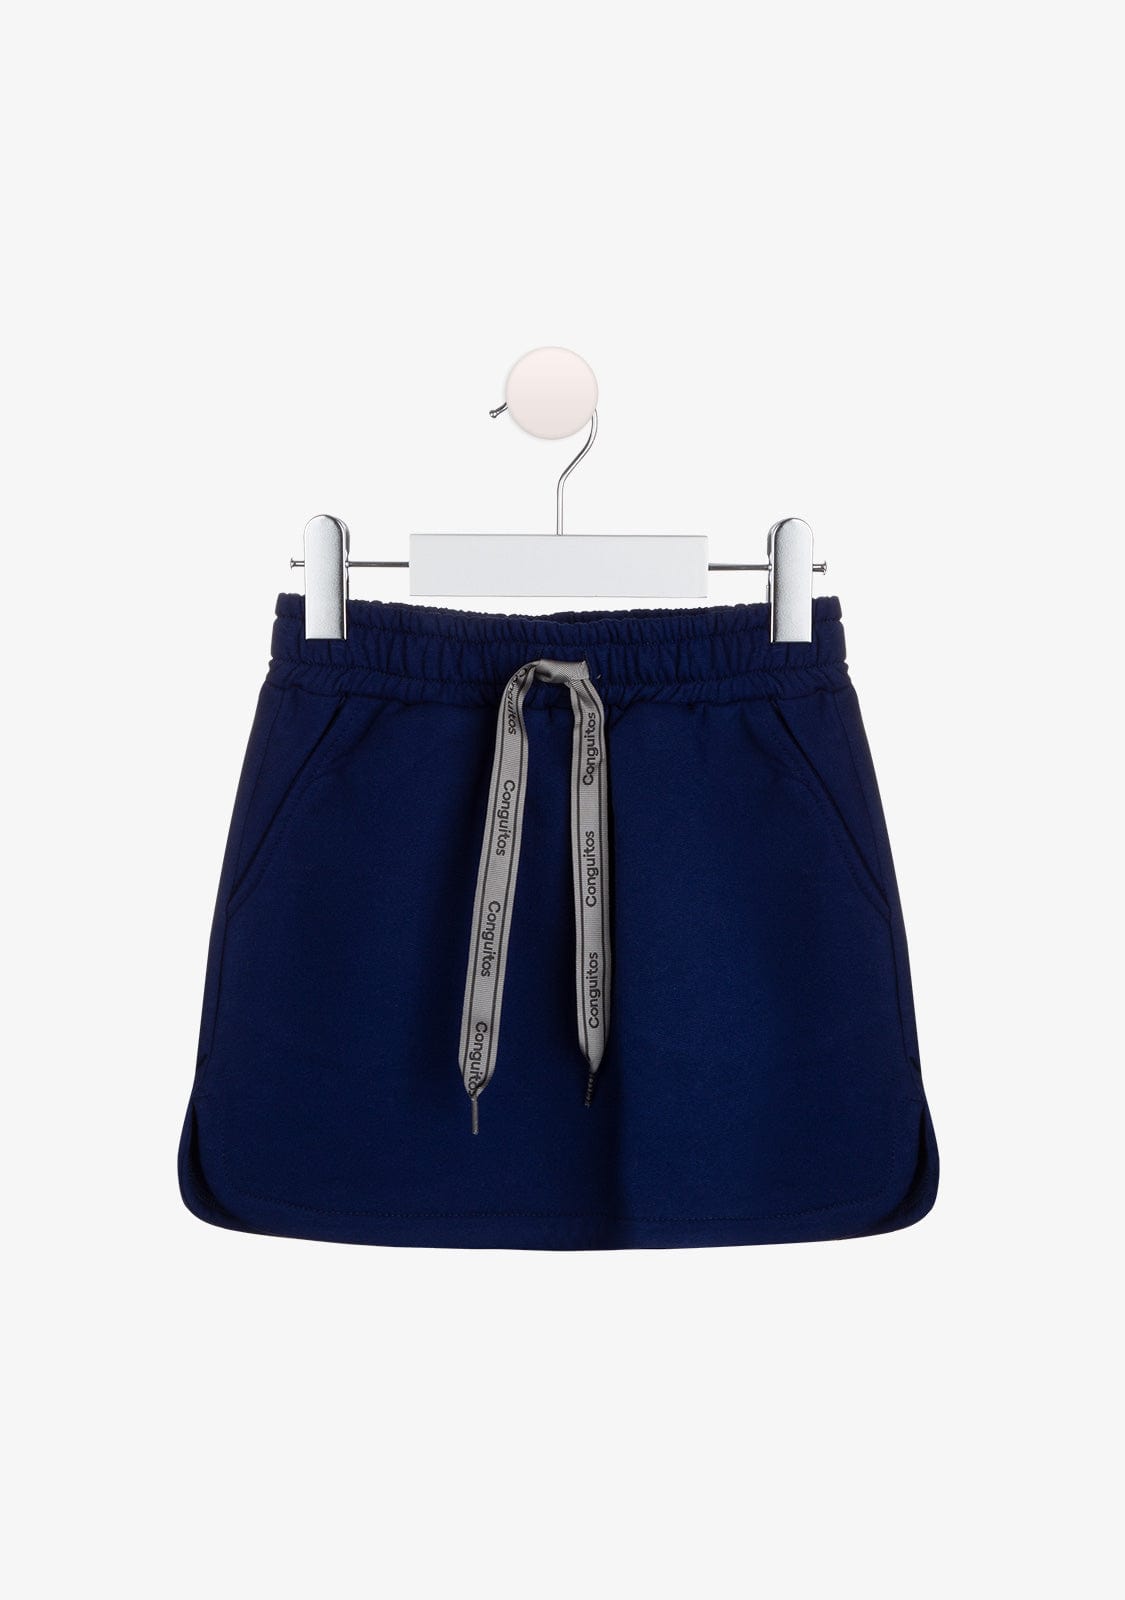 CONGUITOS TEXTIL Clothing Girl's Navy Sports Skirt